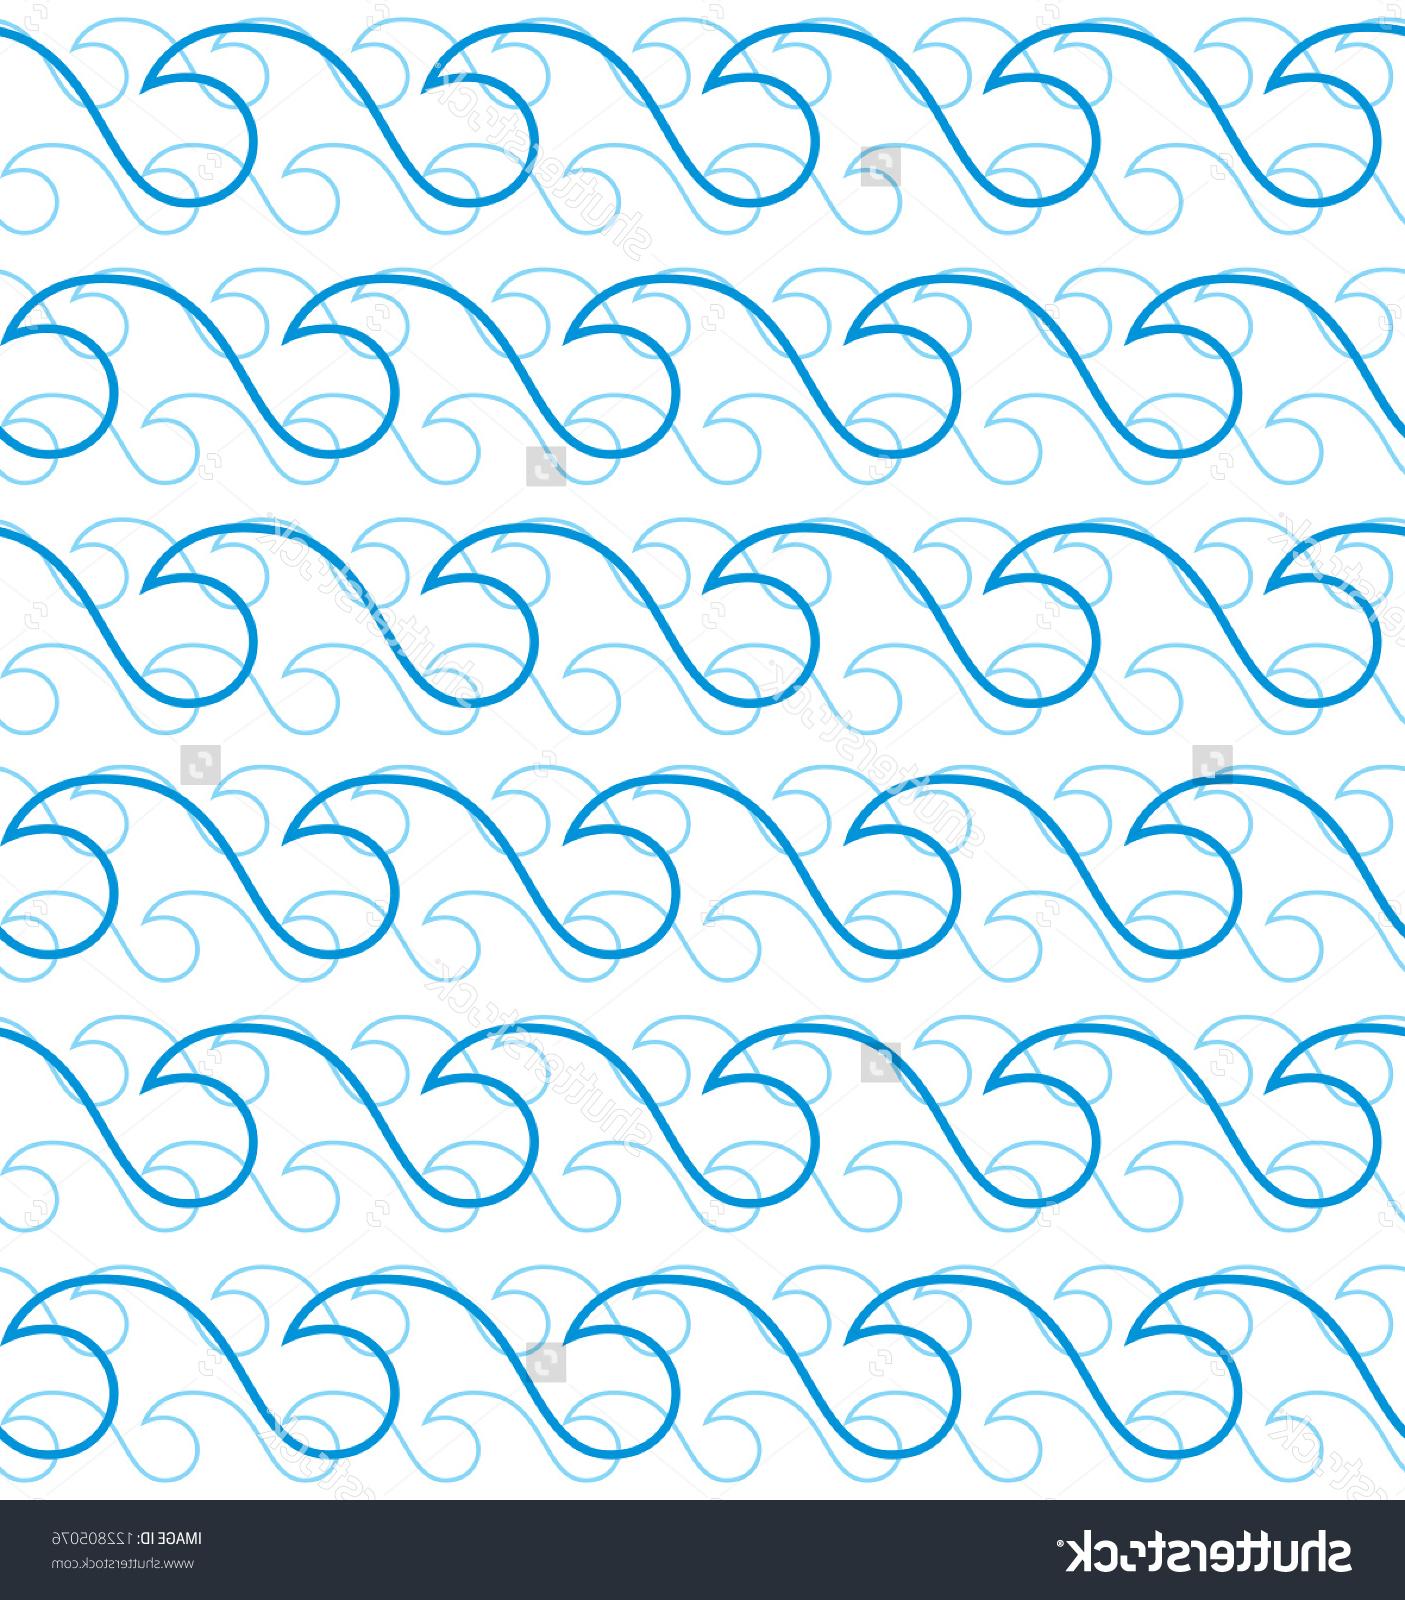 line drawing waves